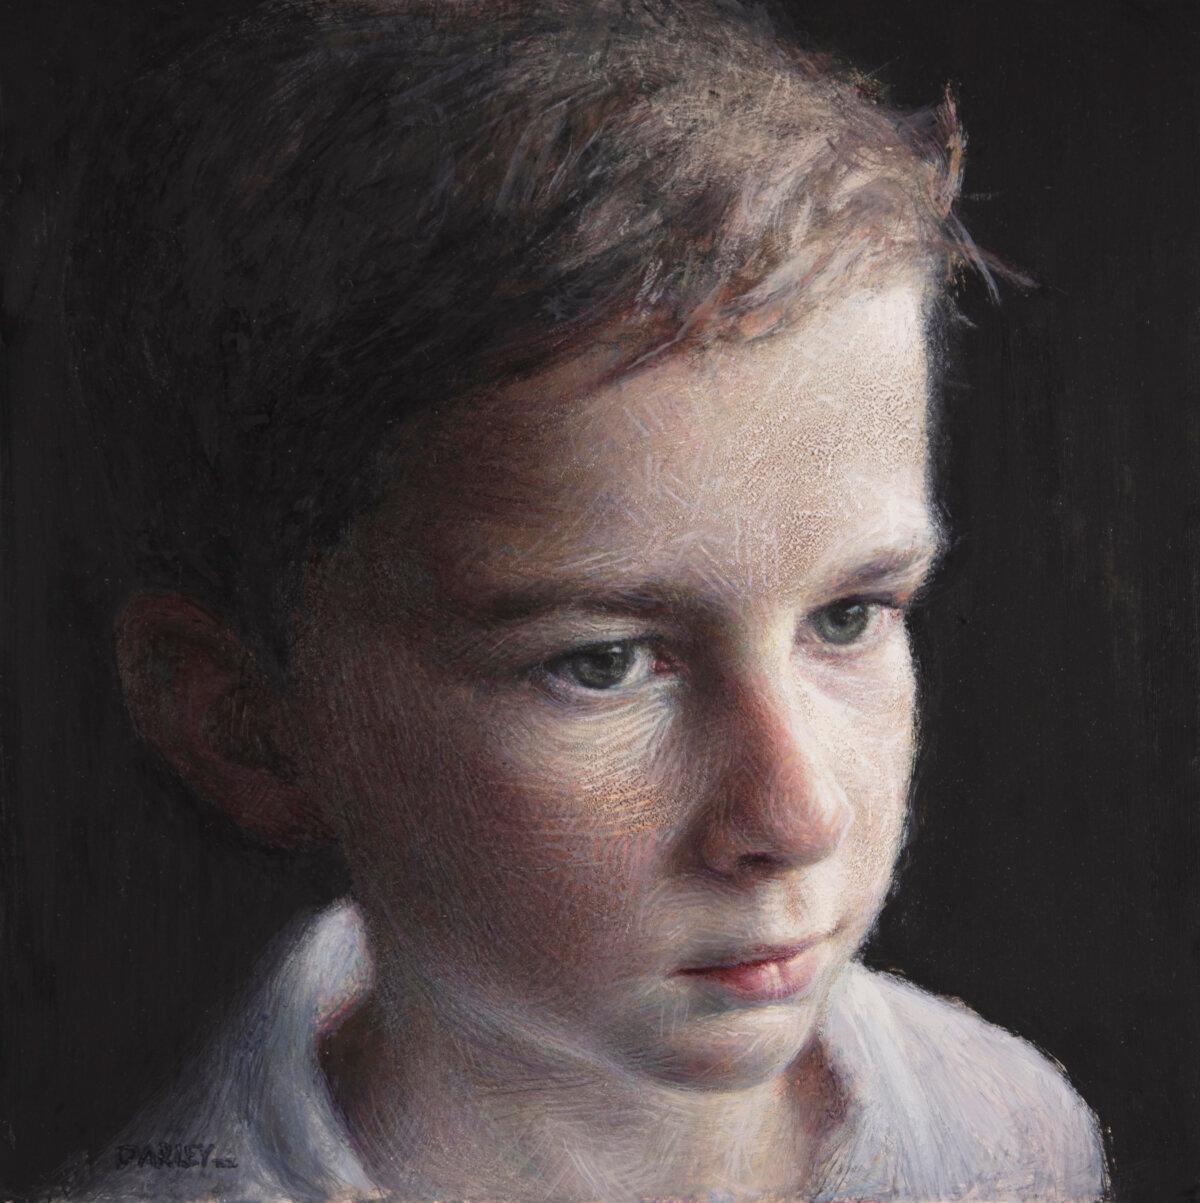 “Hank” by John Darley. Egg tempera on panel; 10 inches by 10 inches. (Courtesy of John Darley)